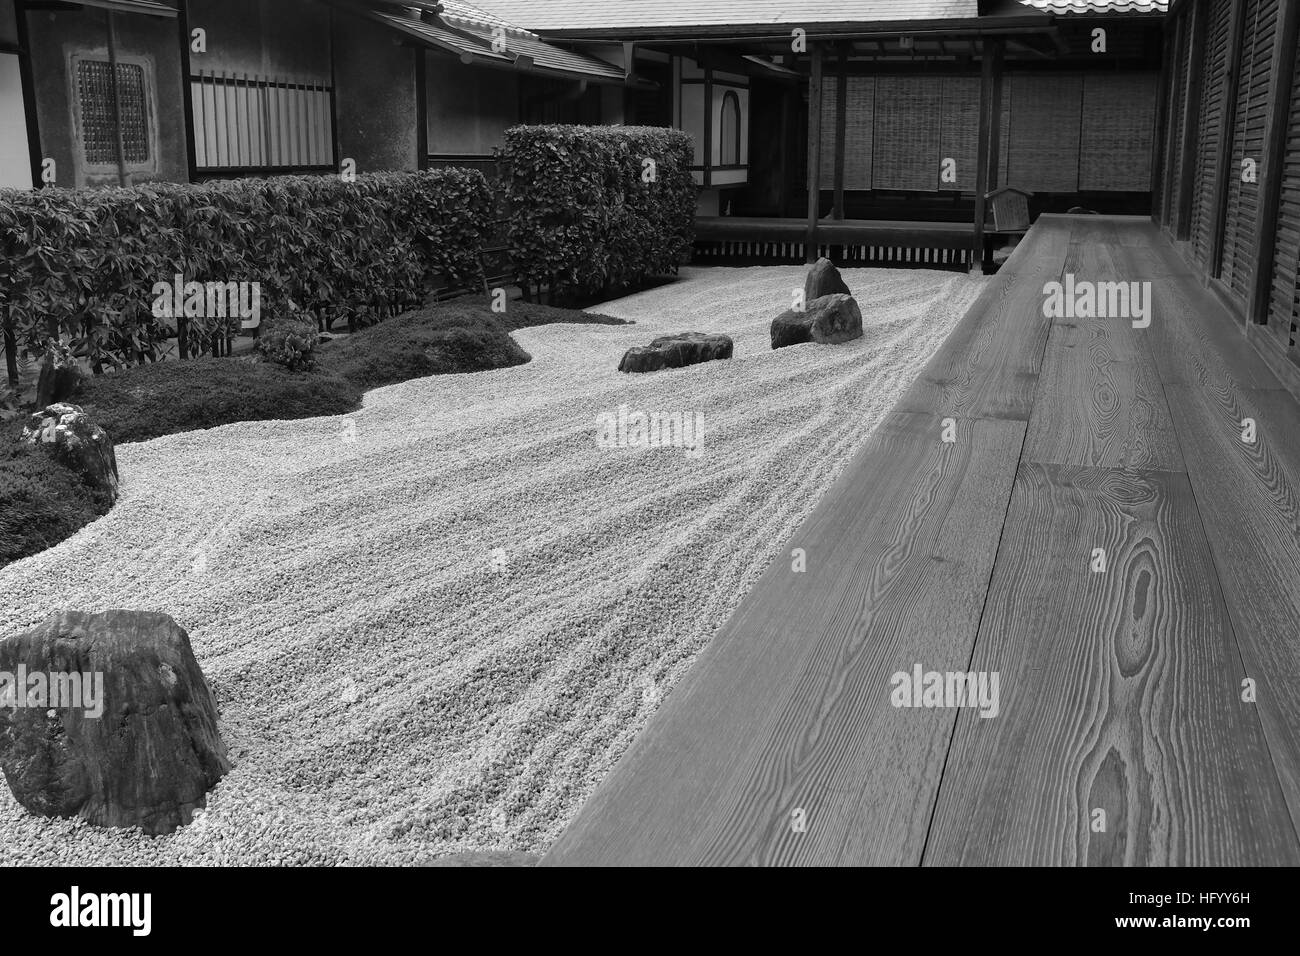 Zen garden in a characteristically Japanese setting in Kyoto, Japan.  A purposefully created dry landscape garden evoking serenity, peace, calmness. Stock Photo